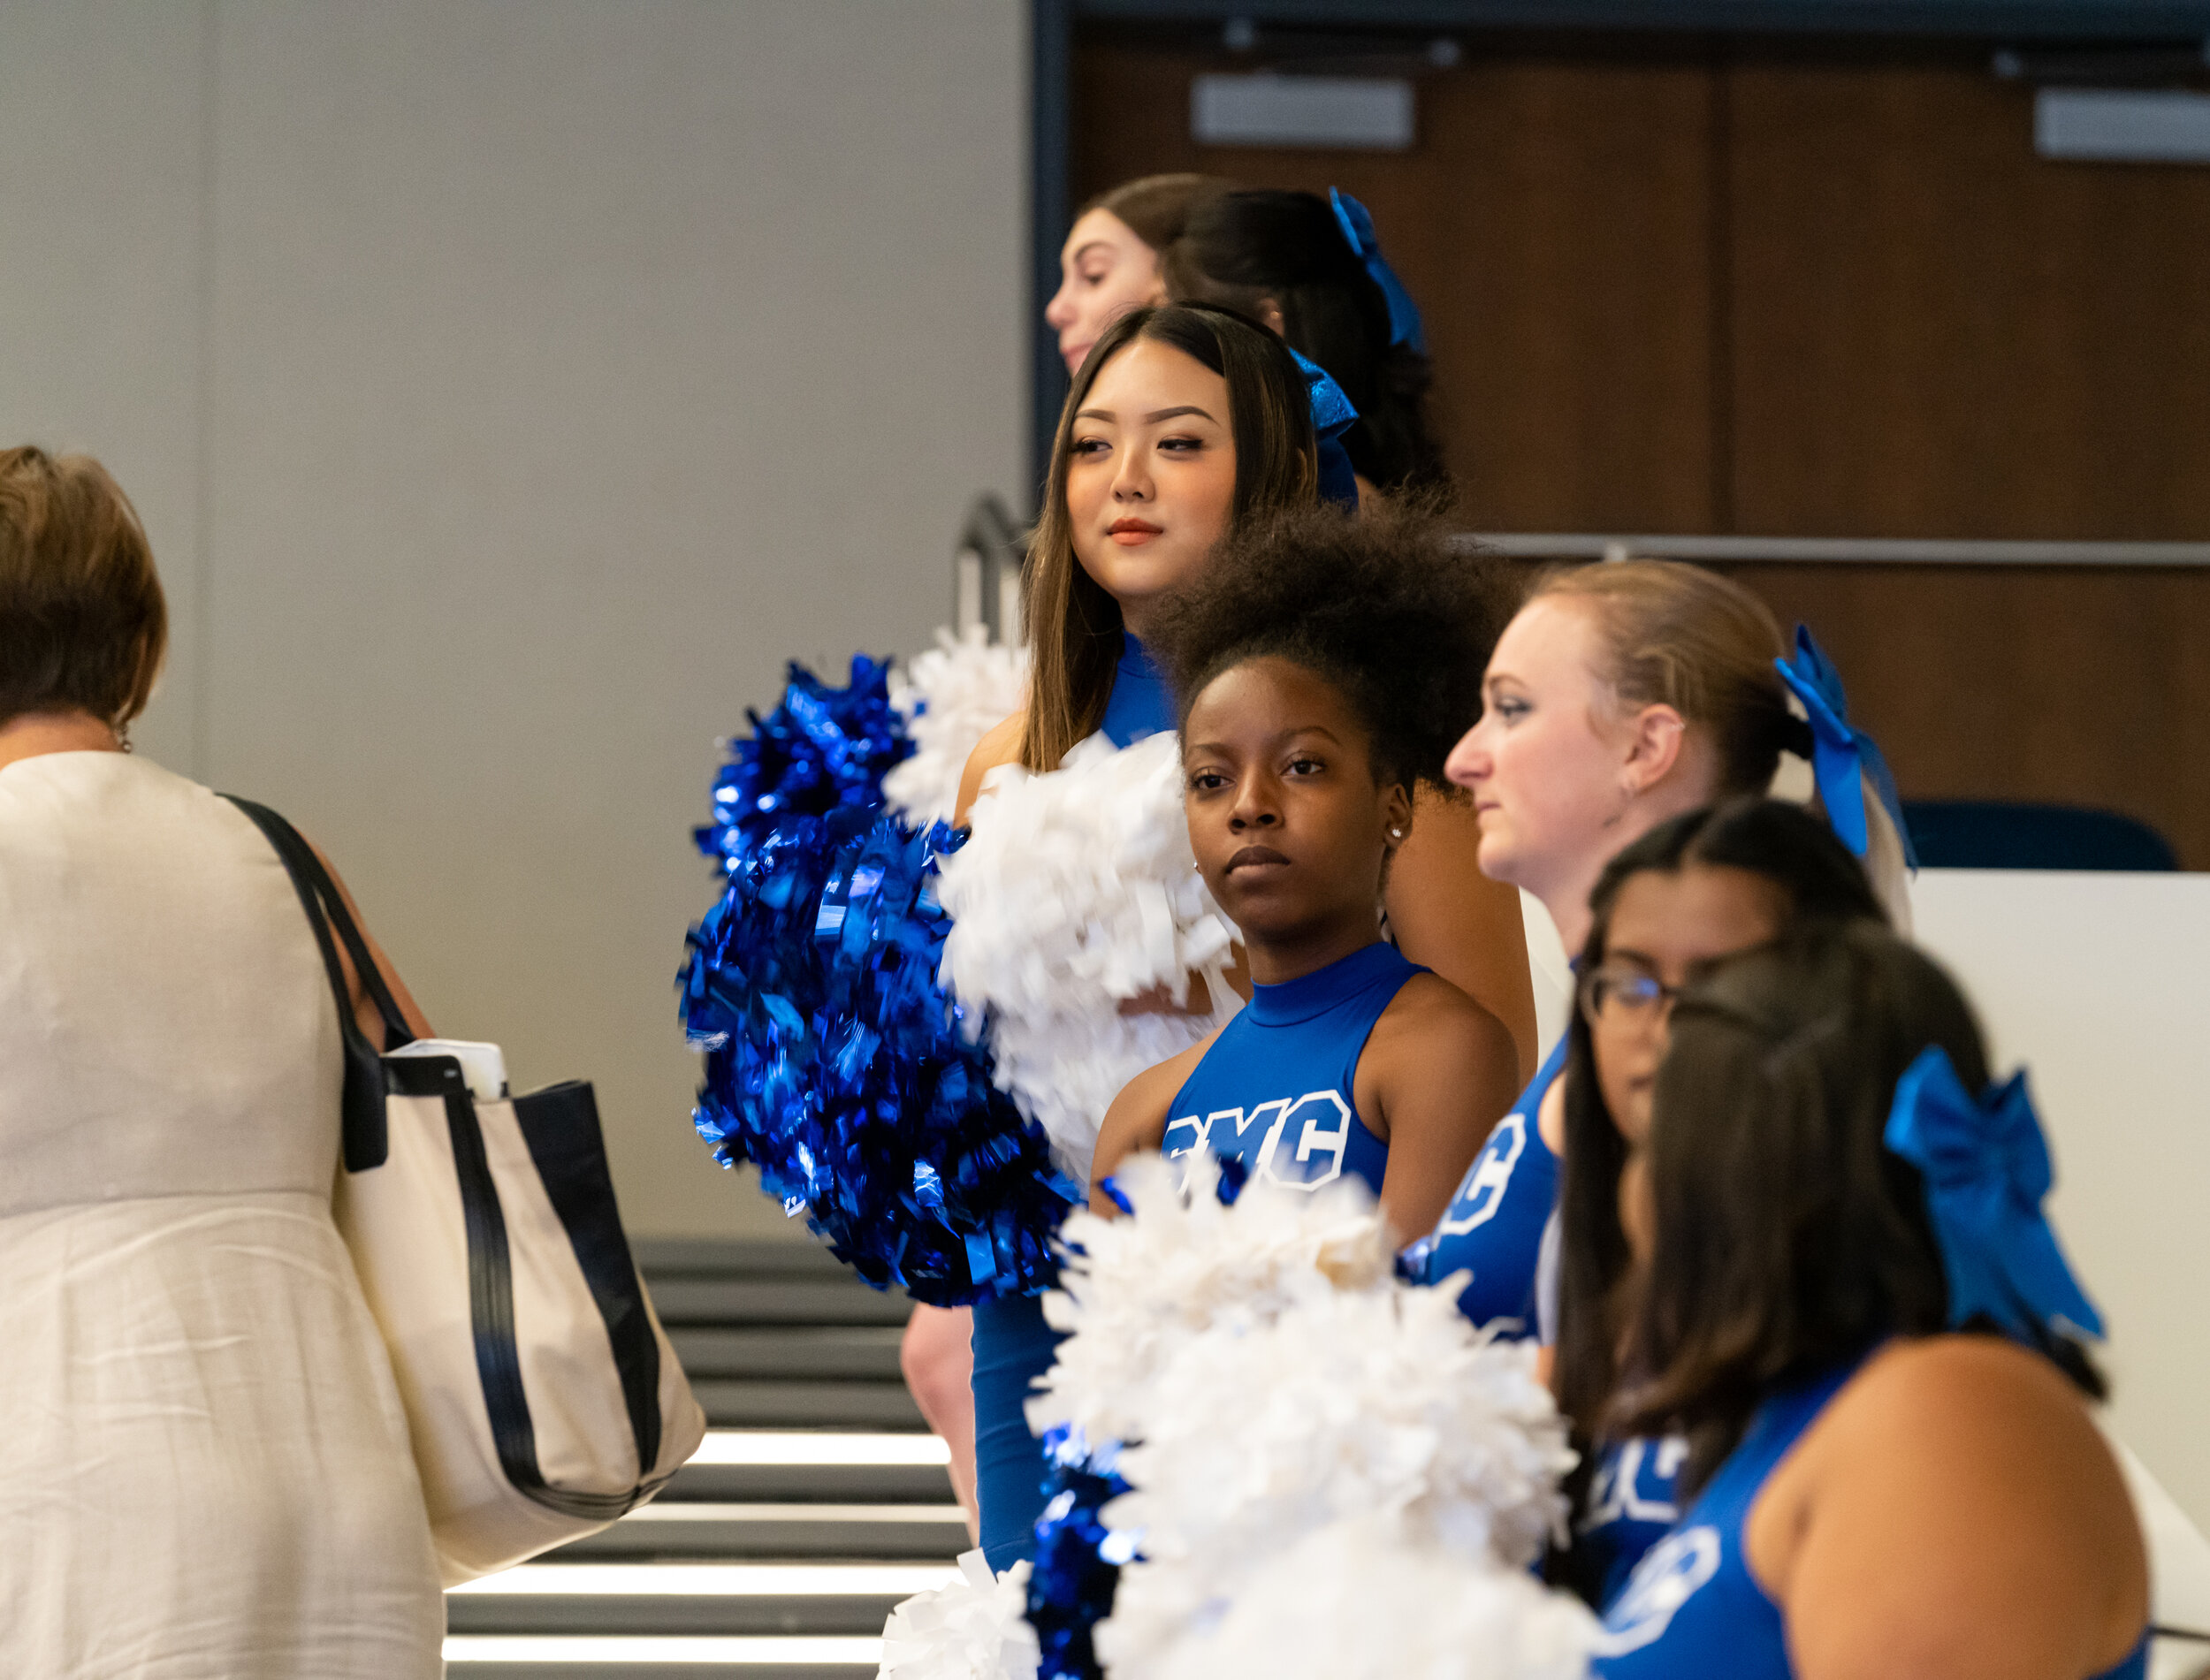  The Santa Monica College Cheer Club at the the ribbon cutting ceremony  for the new Student Services Center and 90th Anniversary Celebration at the Santa Monica College main campus on October 22, 2019.  (Suzanne Steiner/The Corsair) 